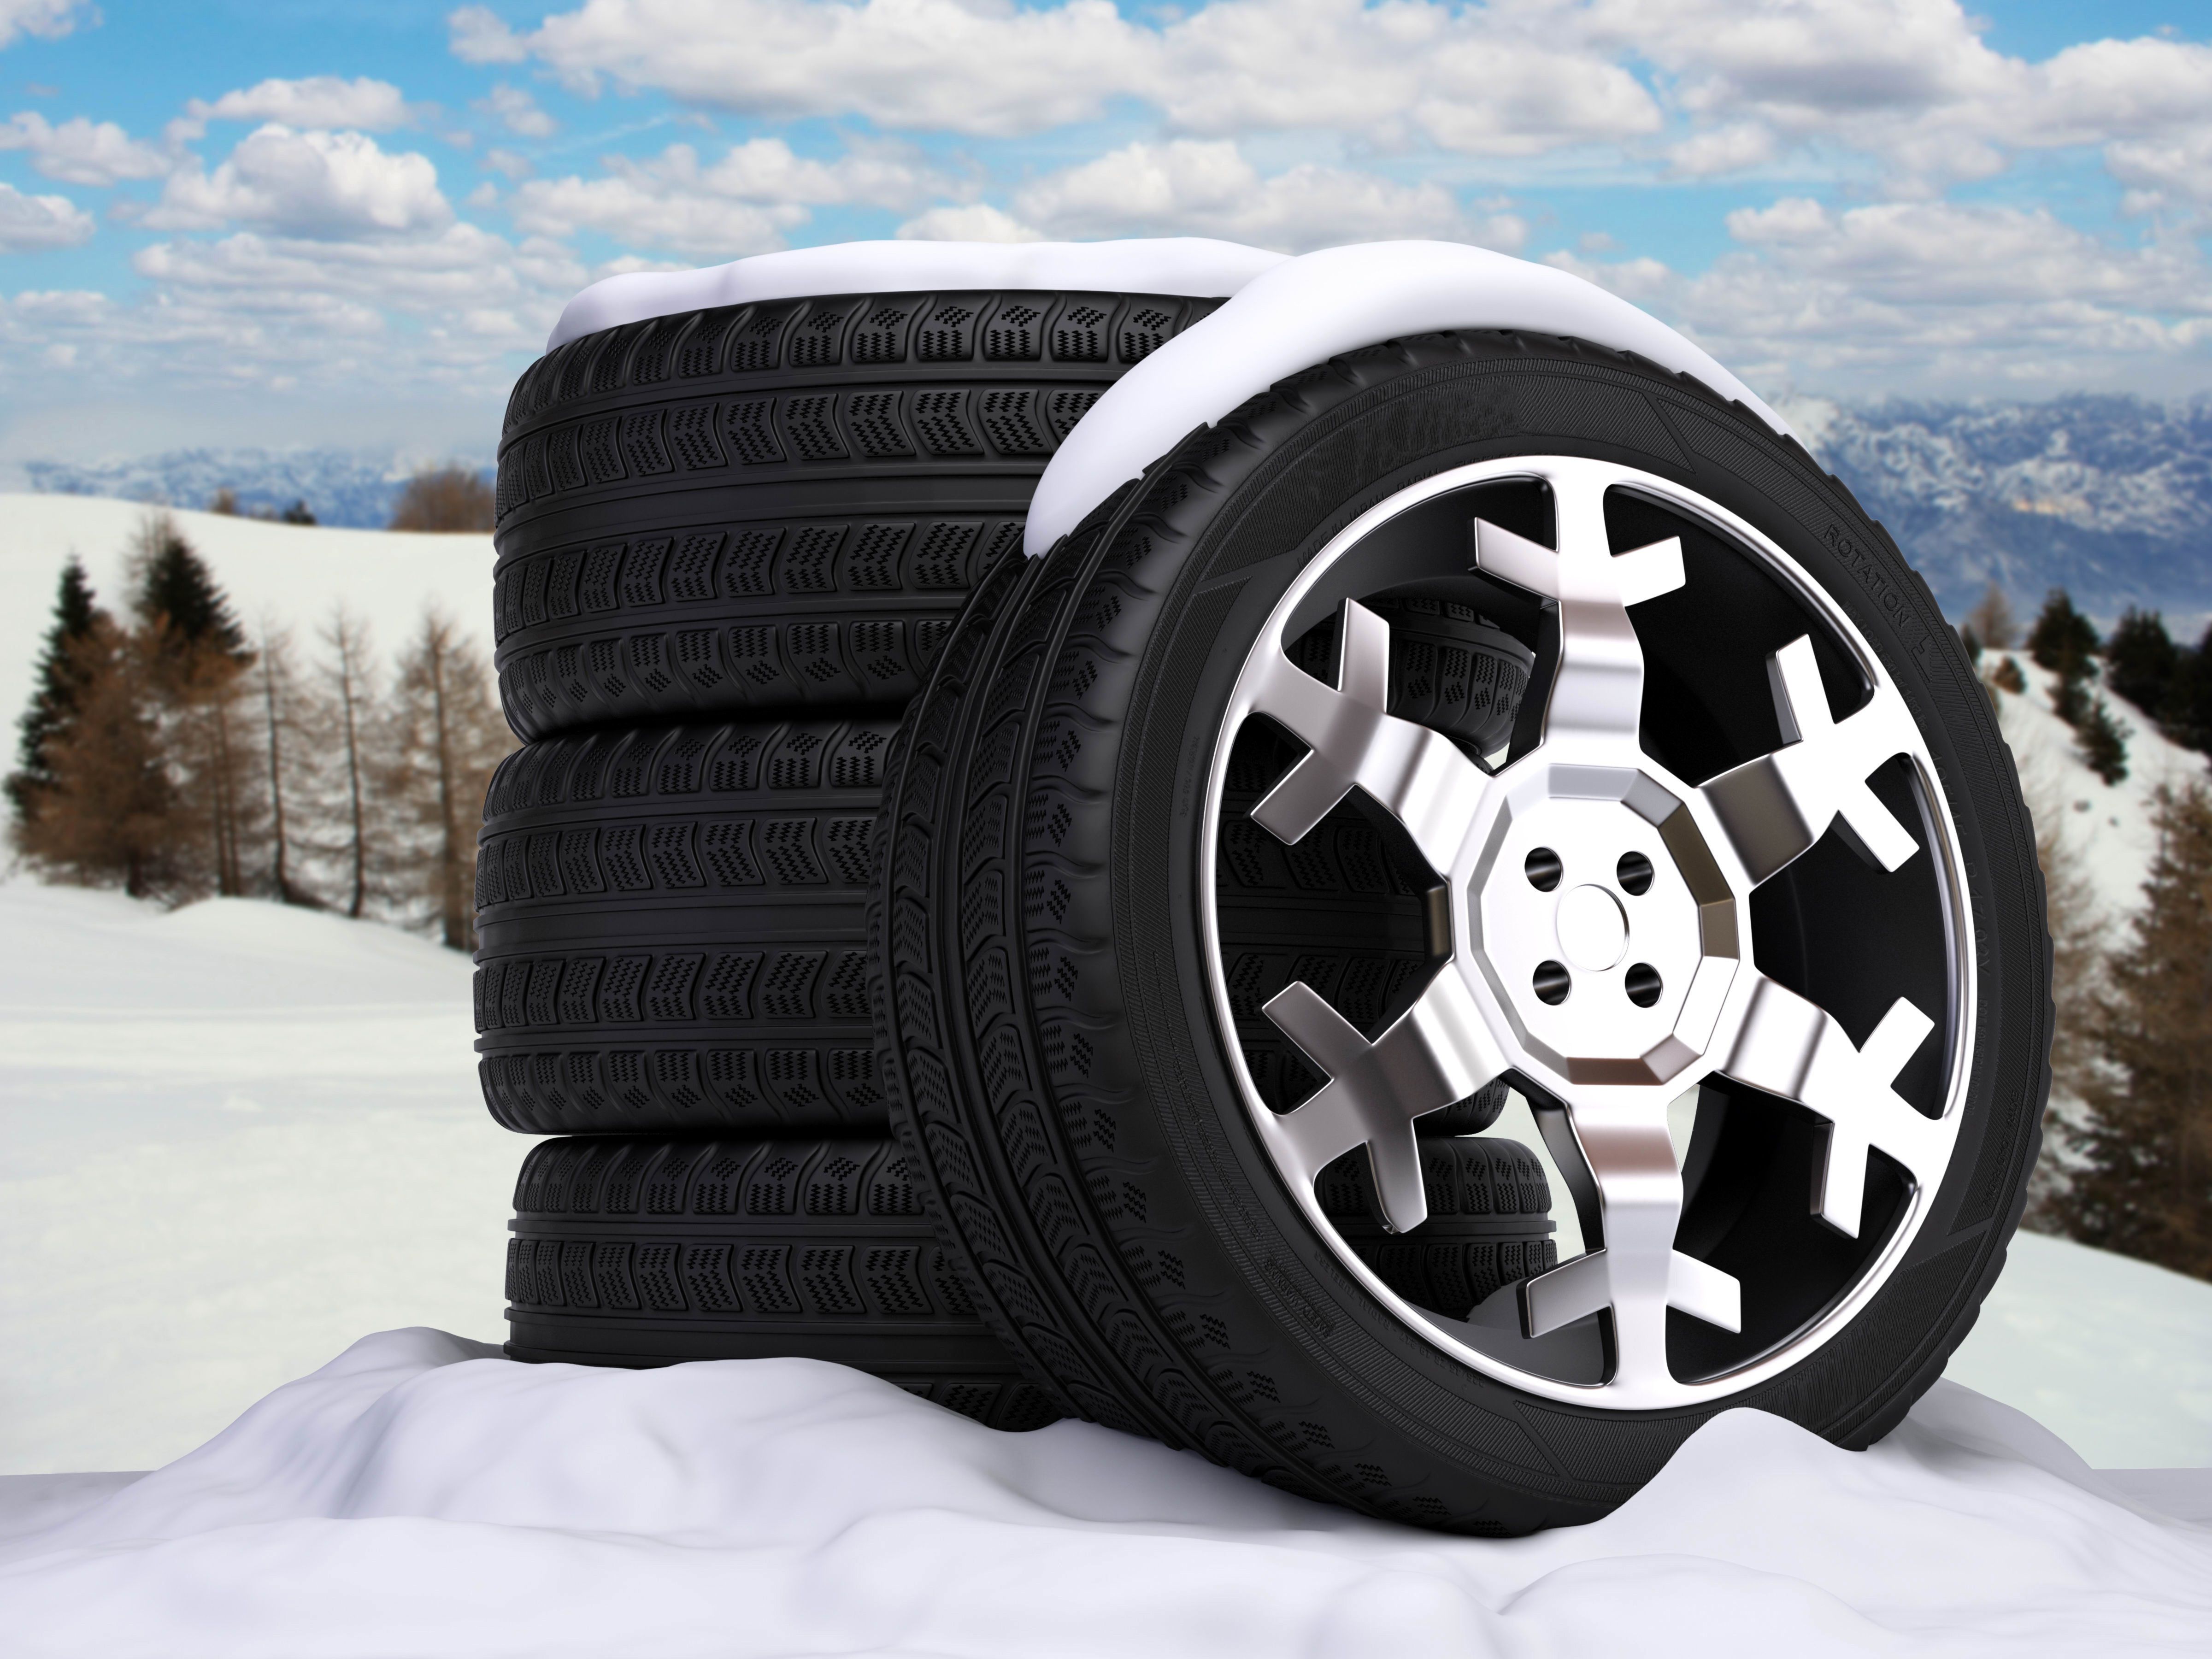 Winter tires ready wallpaper and image, picture